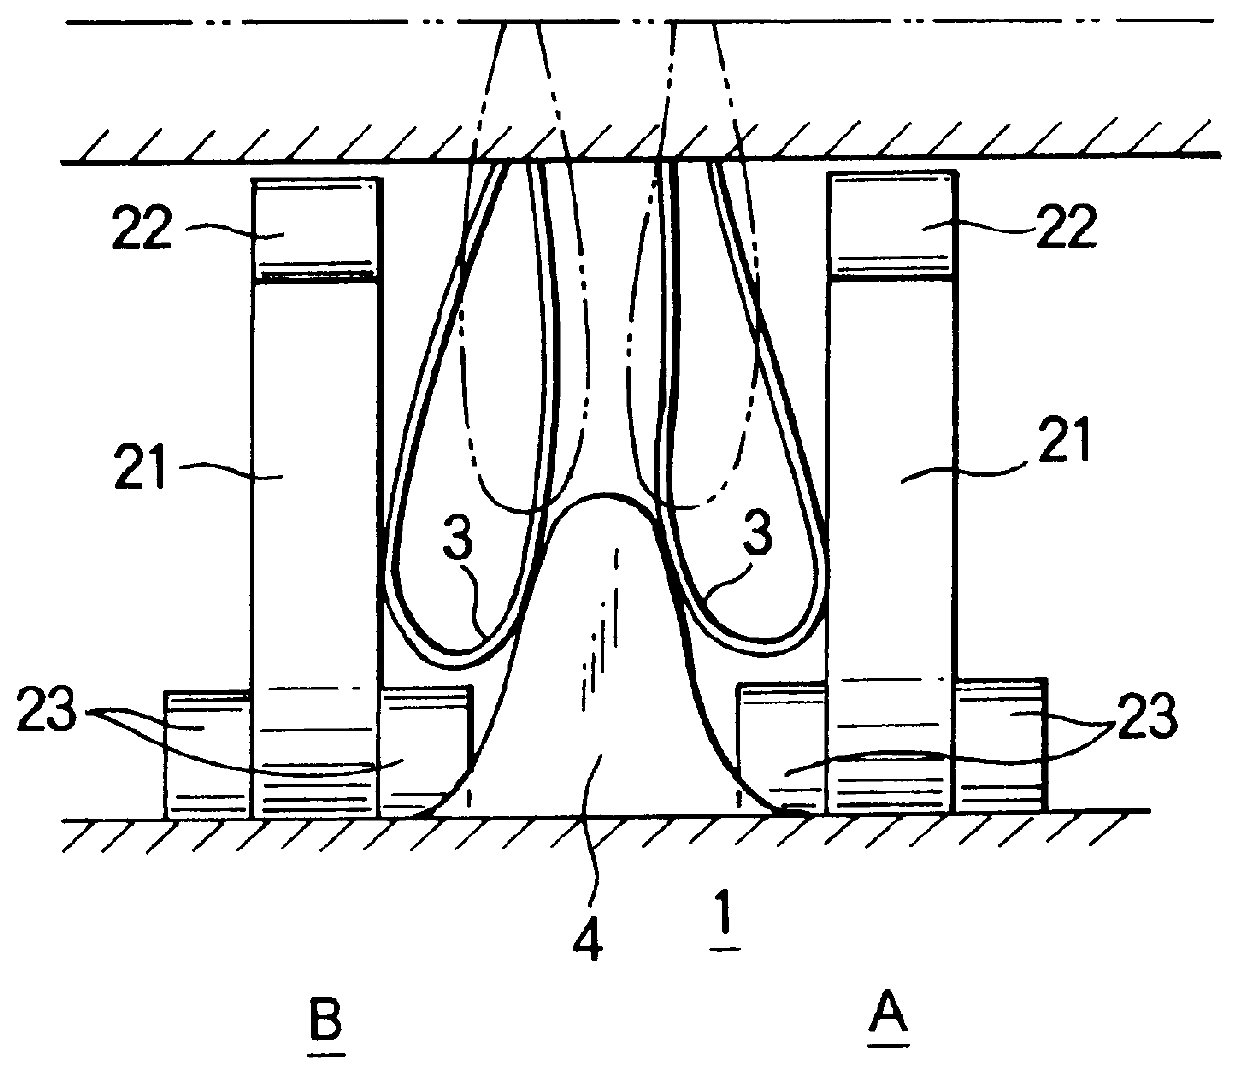 Molded surface fastener